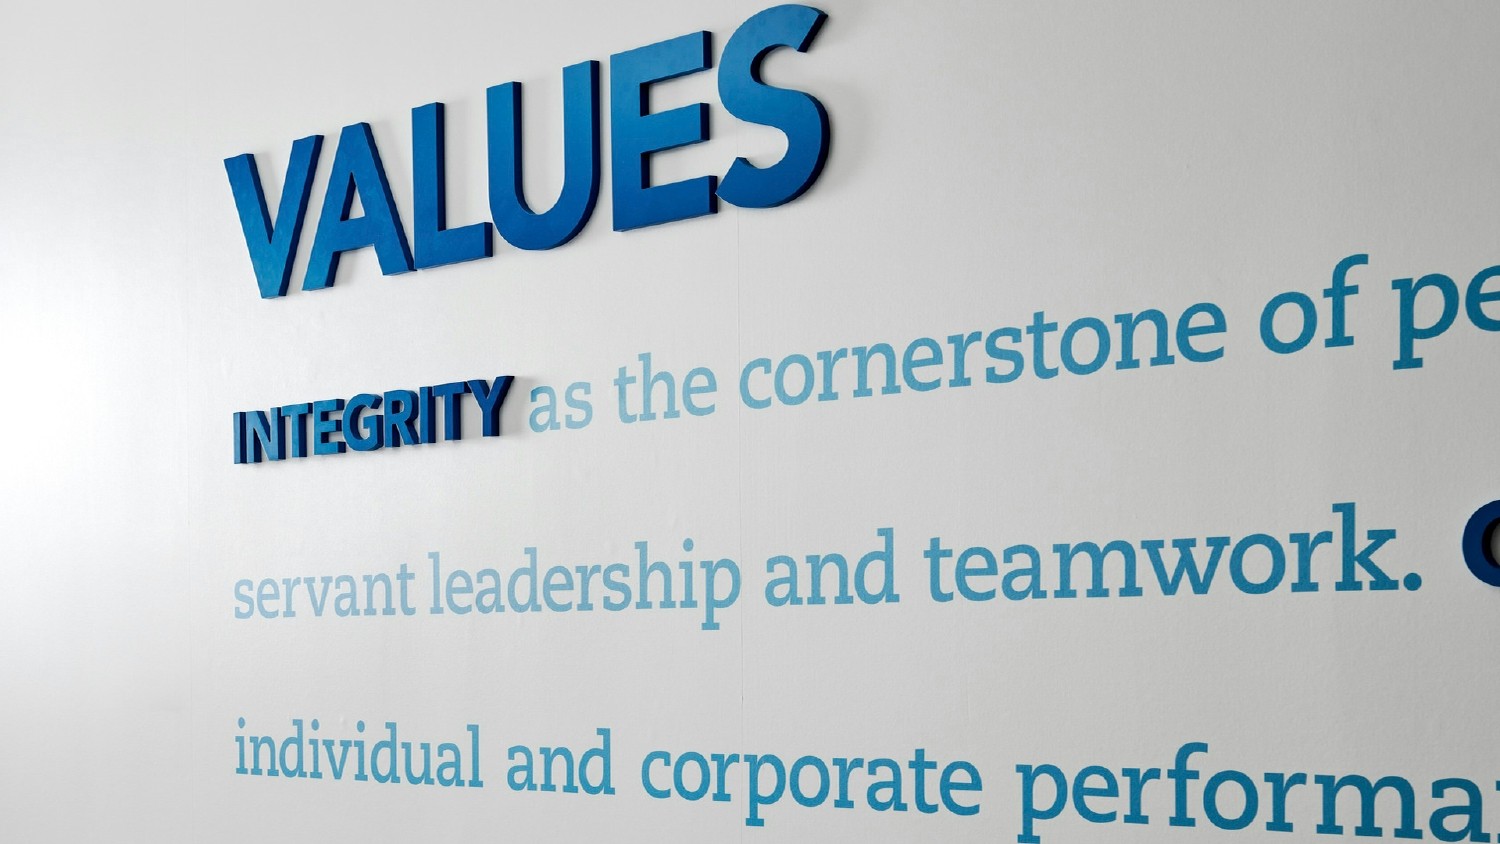 Insperity’s values provide a foundation for how we conduct business.